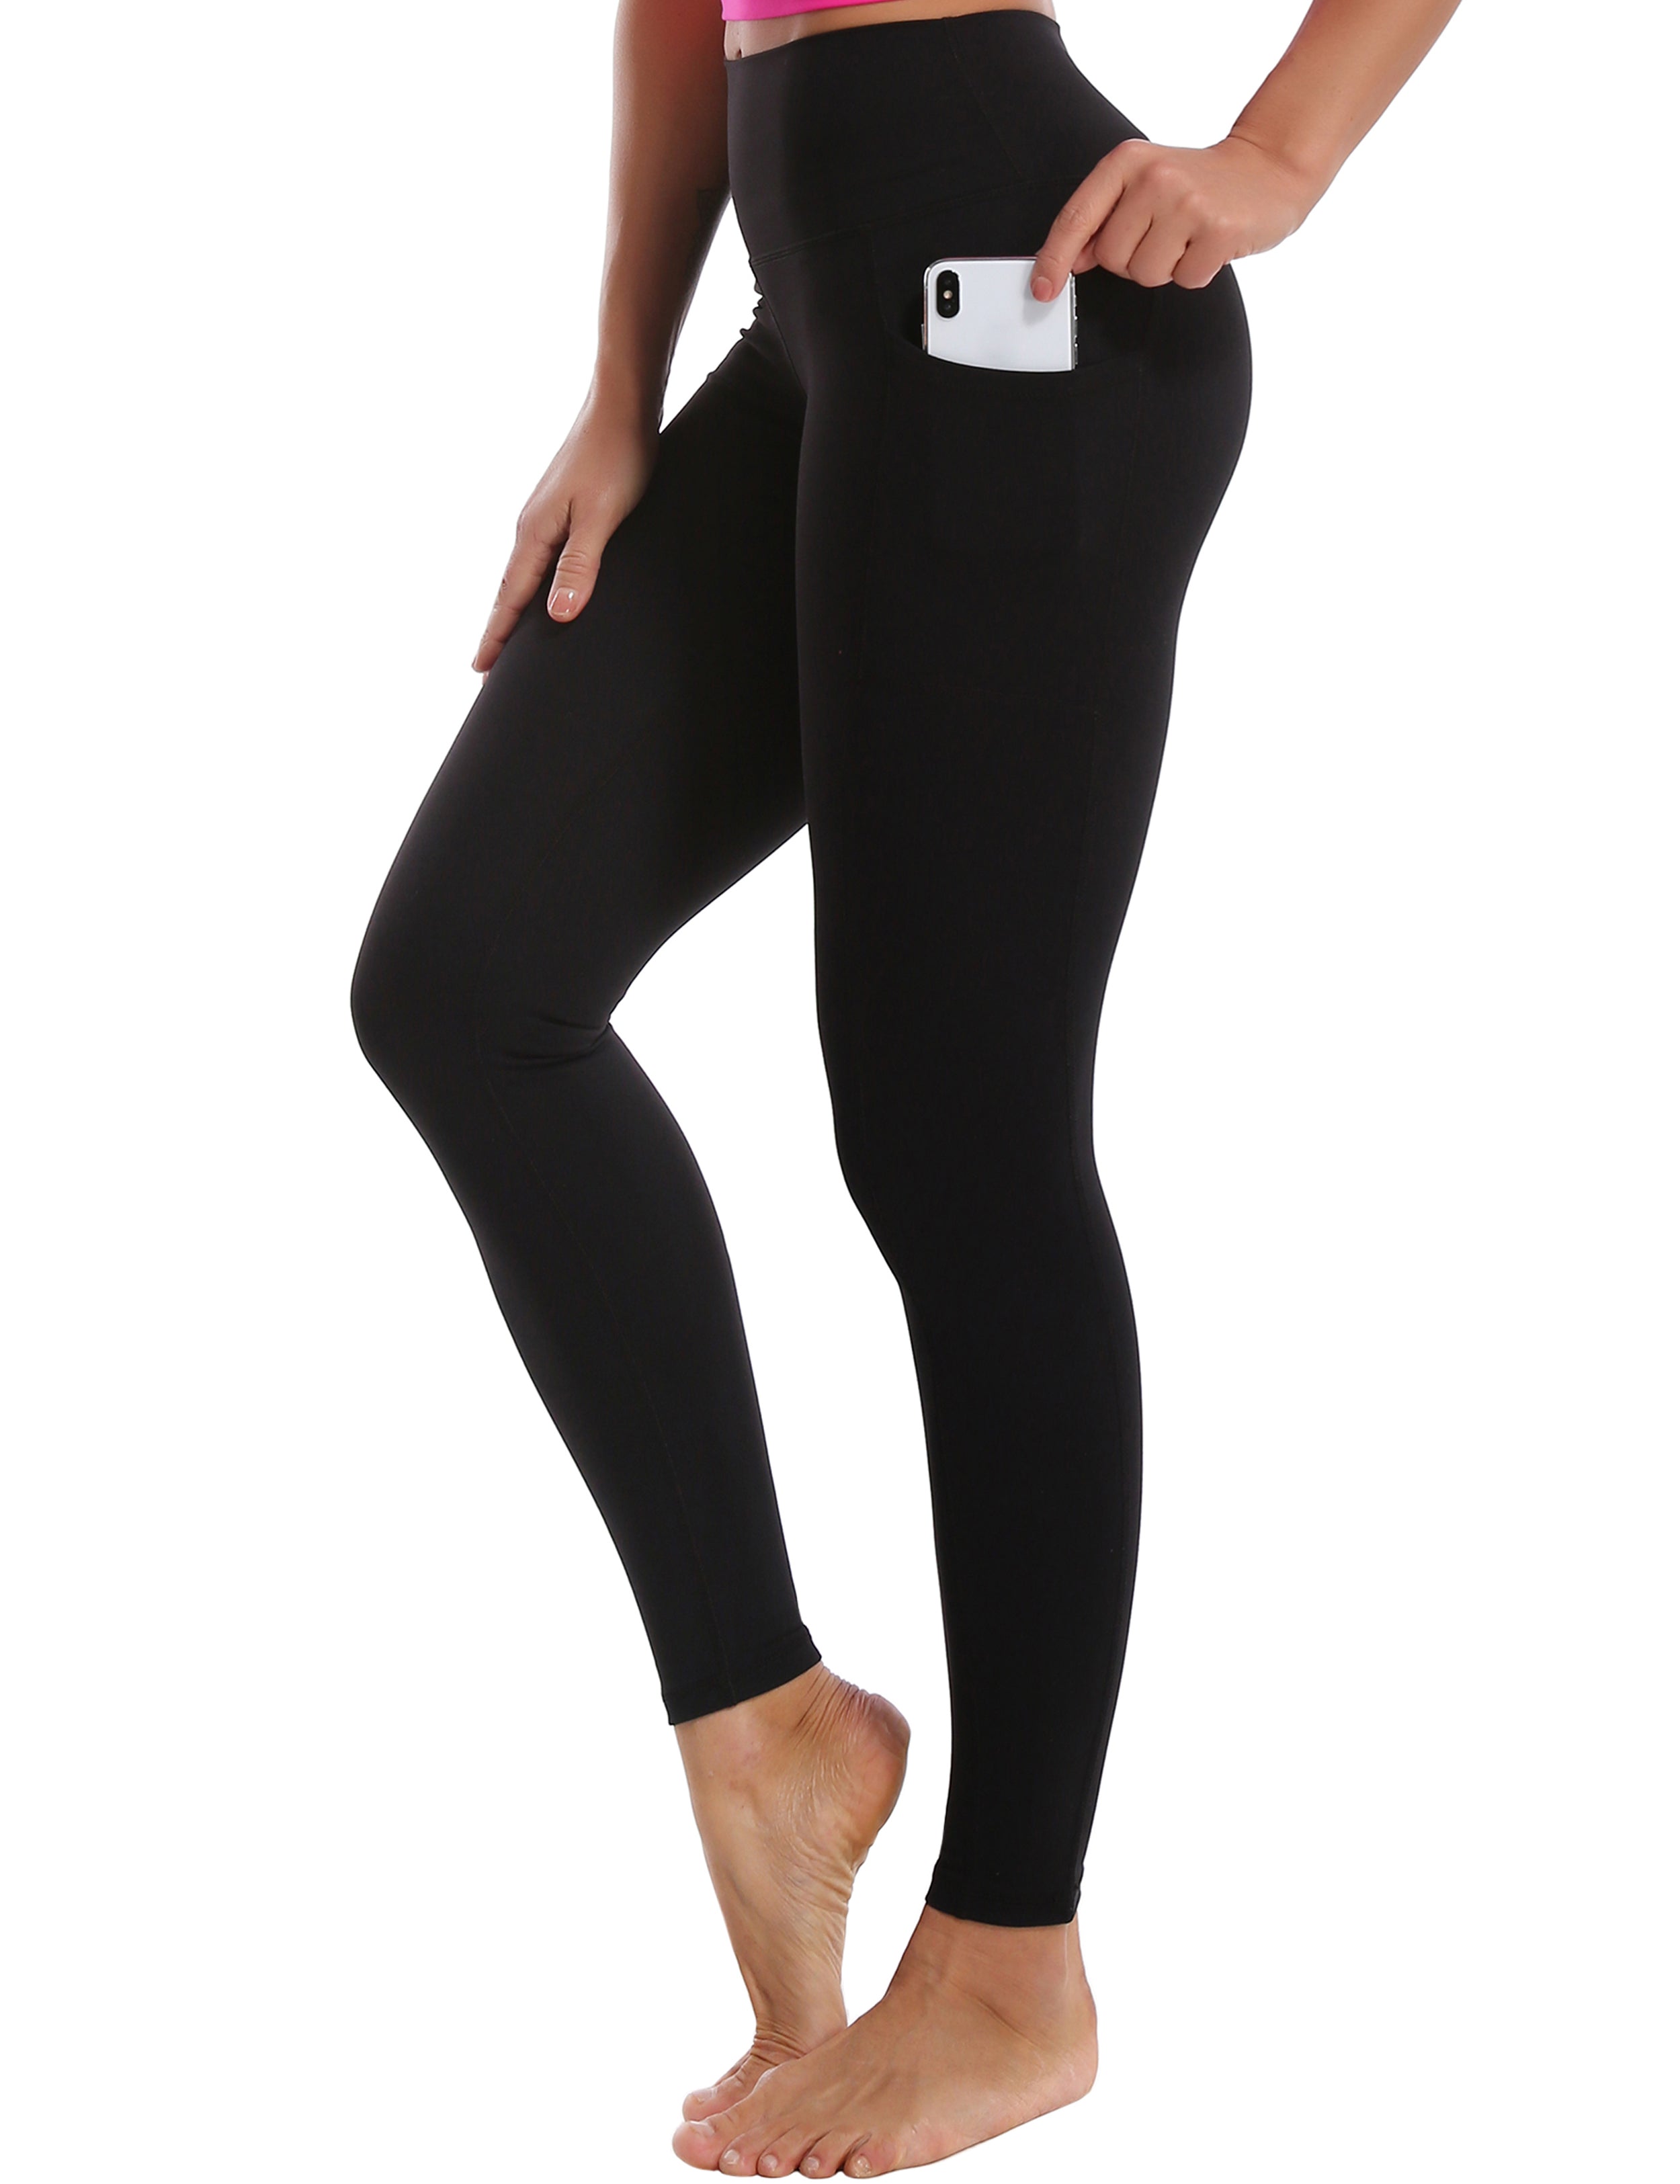 High Waisted Plus Size Pants 7/8 Length Leggings with Pockets